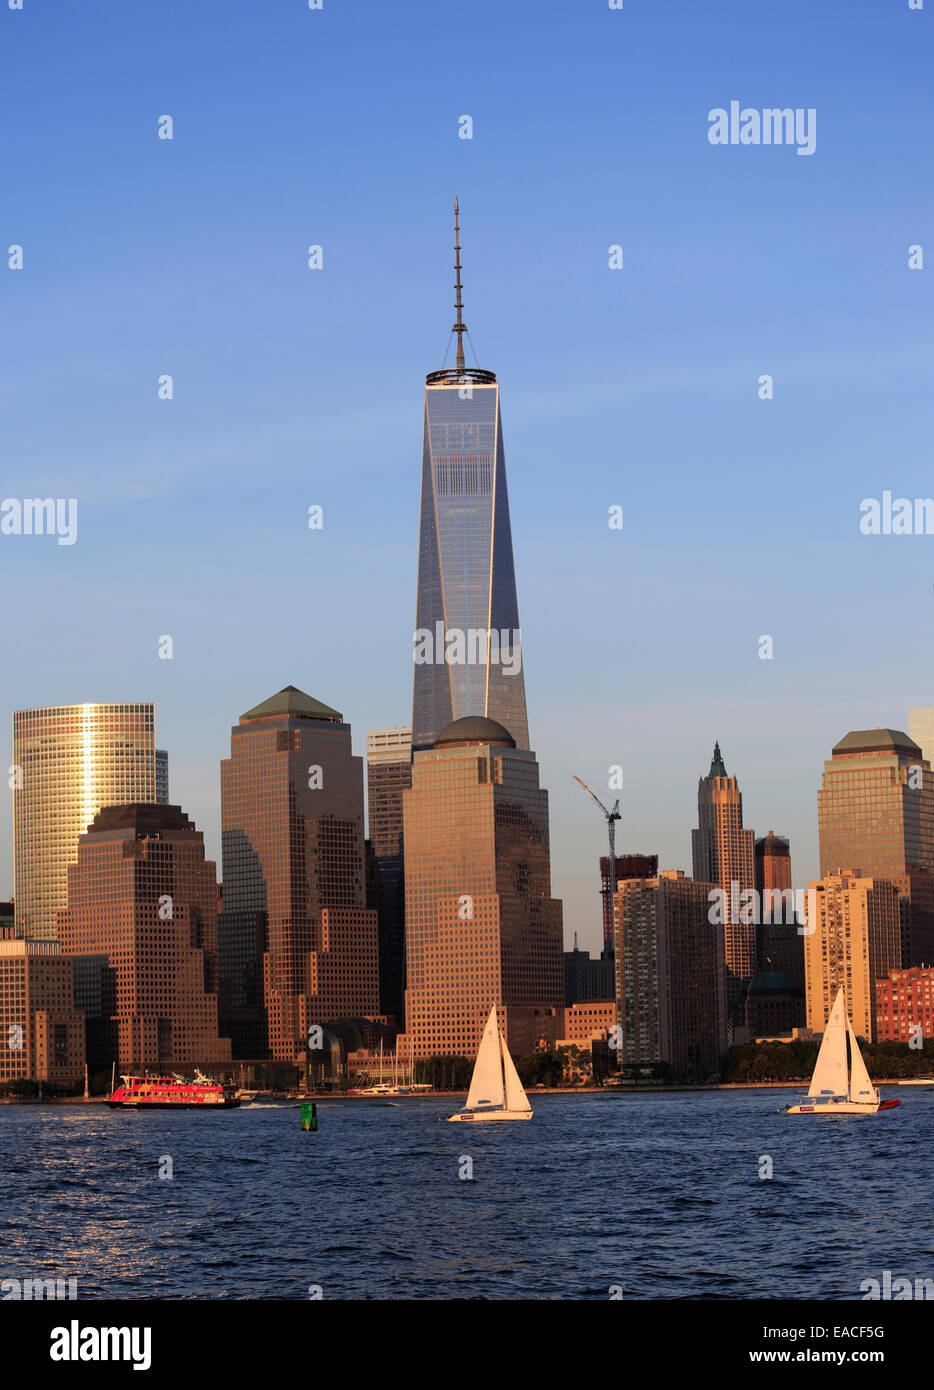 View of lower Manhattan and Freedom Tower at sunset from Liberty State Park Jersey City New Jersey Stock Photo